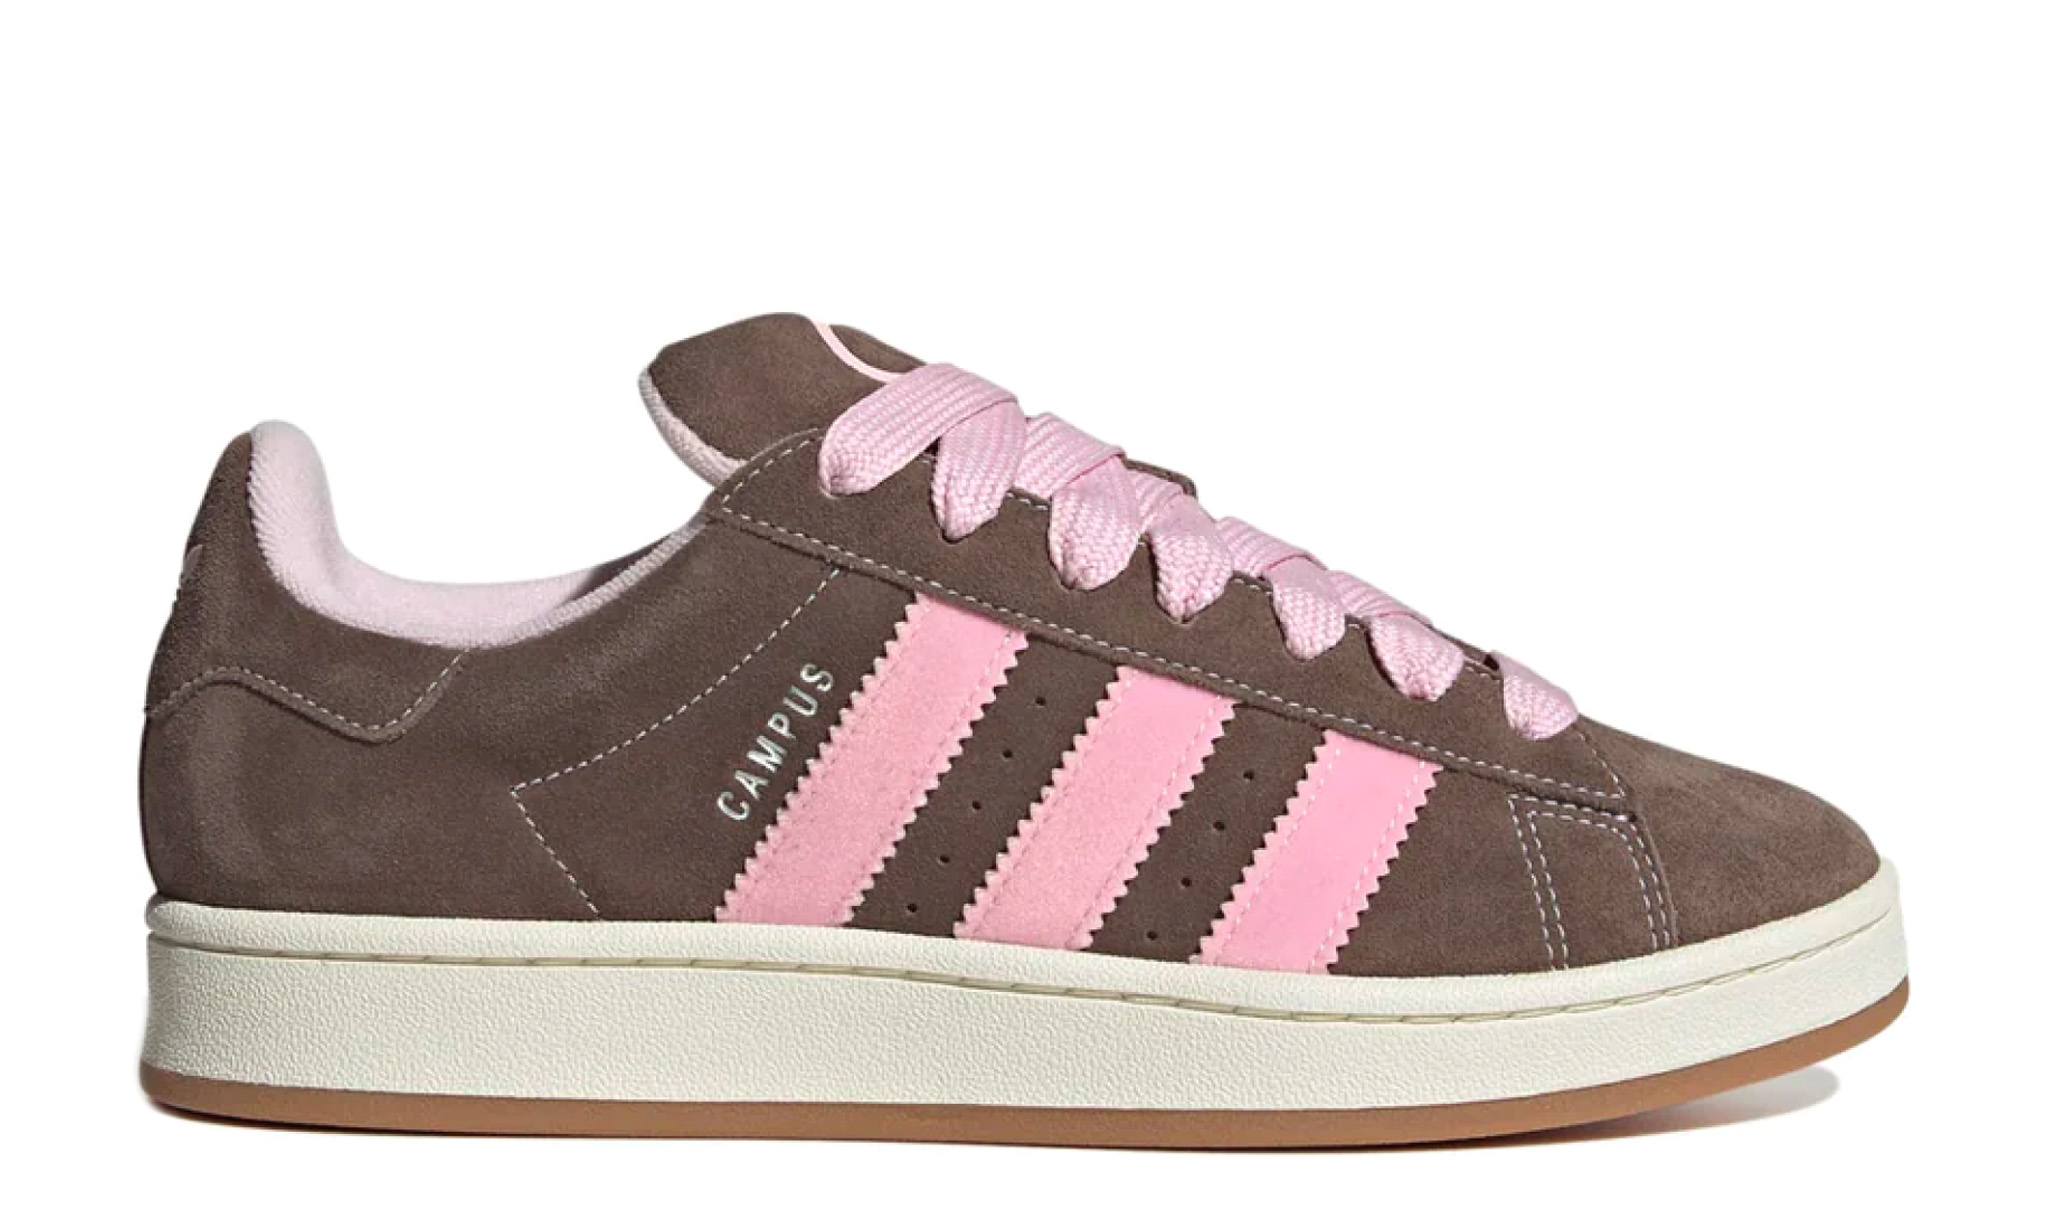 Адидас 00. Adidas Campus 00s Brown and Pink. Adidas Campus 00s Dust Cargo Clear Pink. Adidas Campus 00s Brown. Adidas Campus 00s.